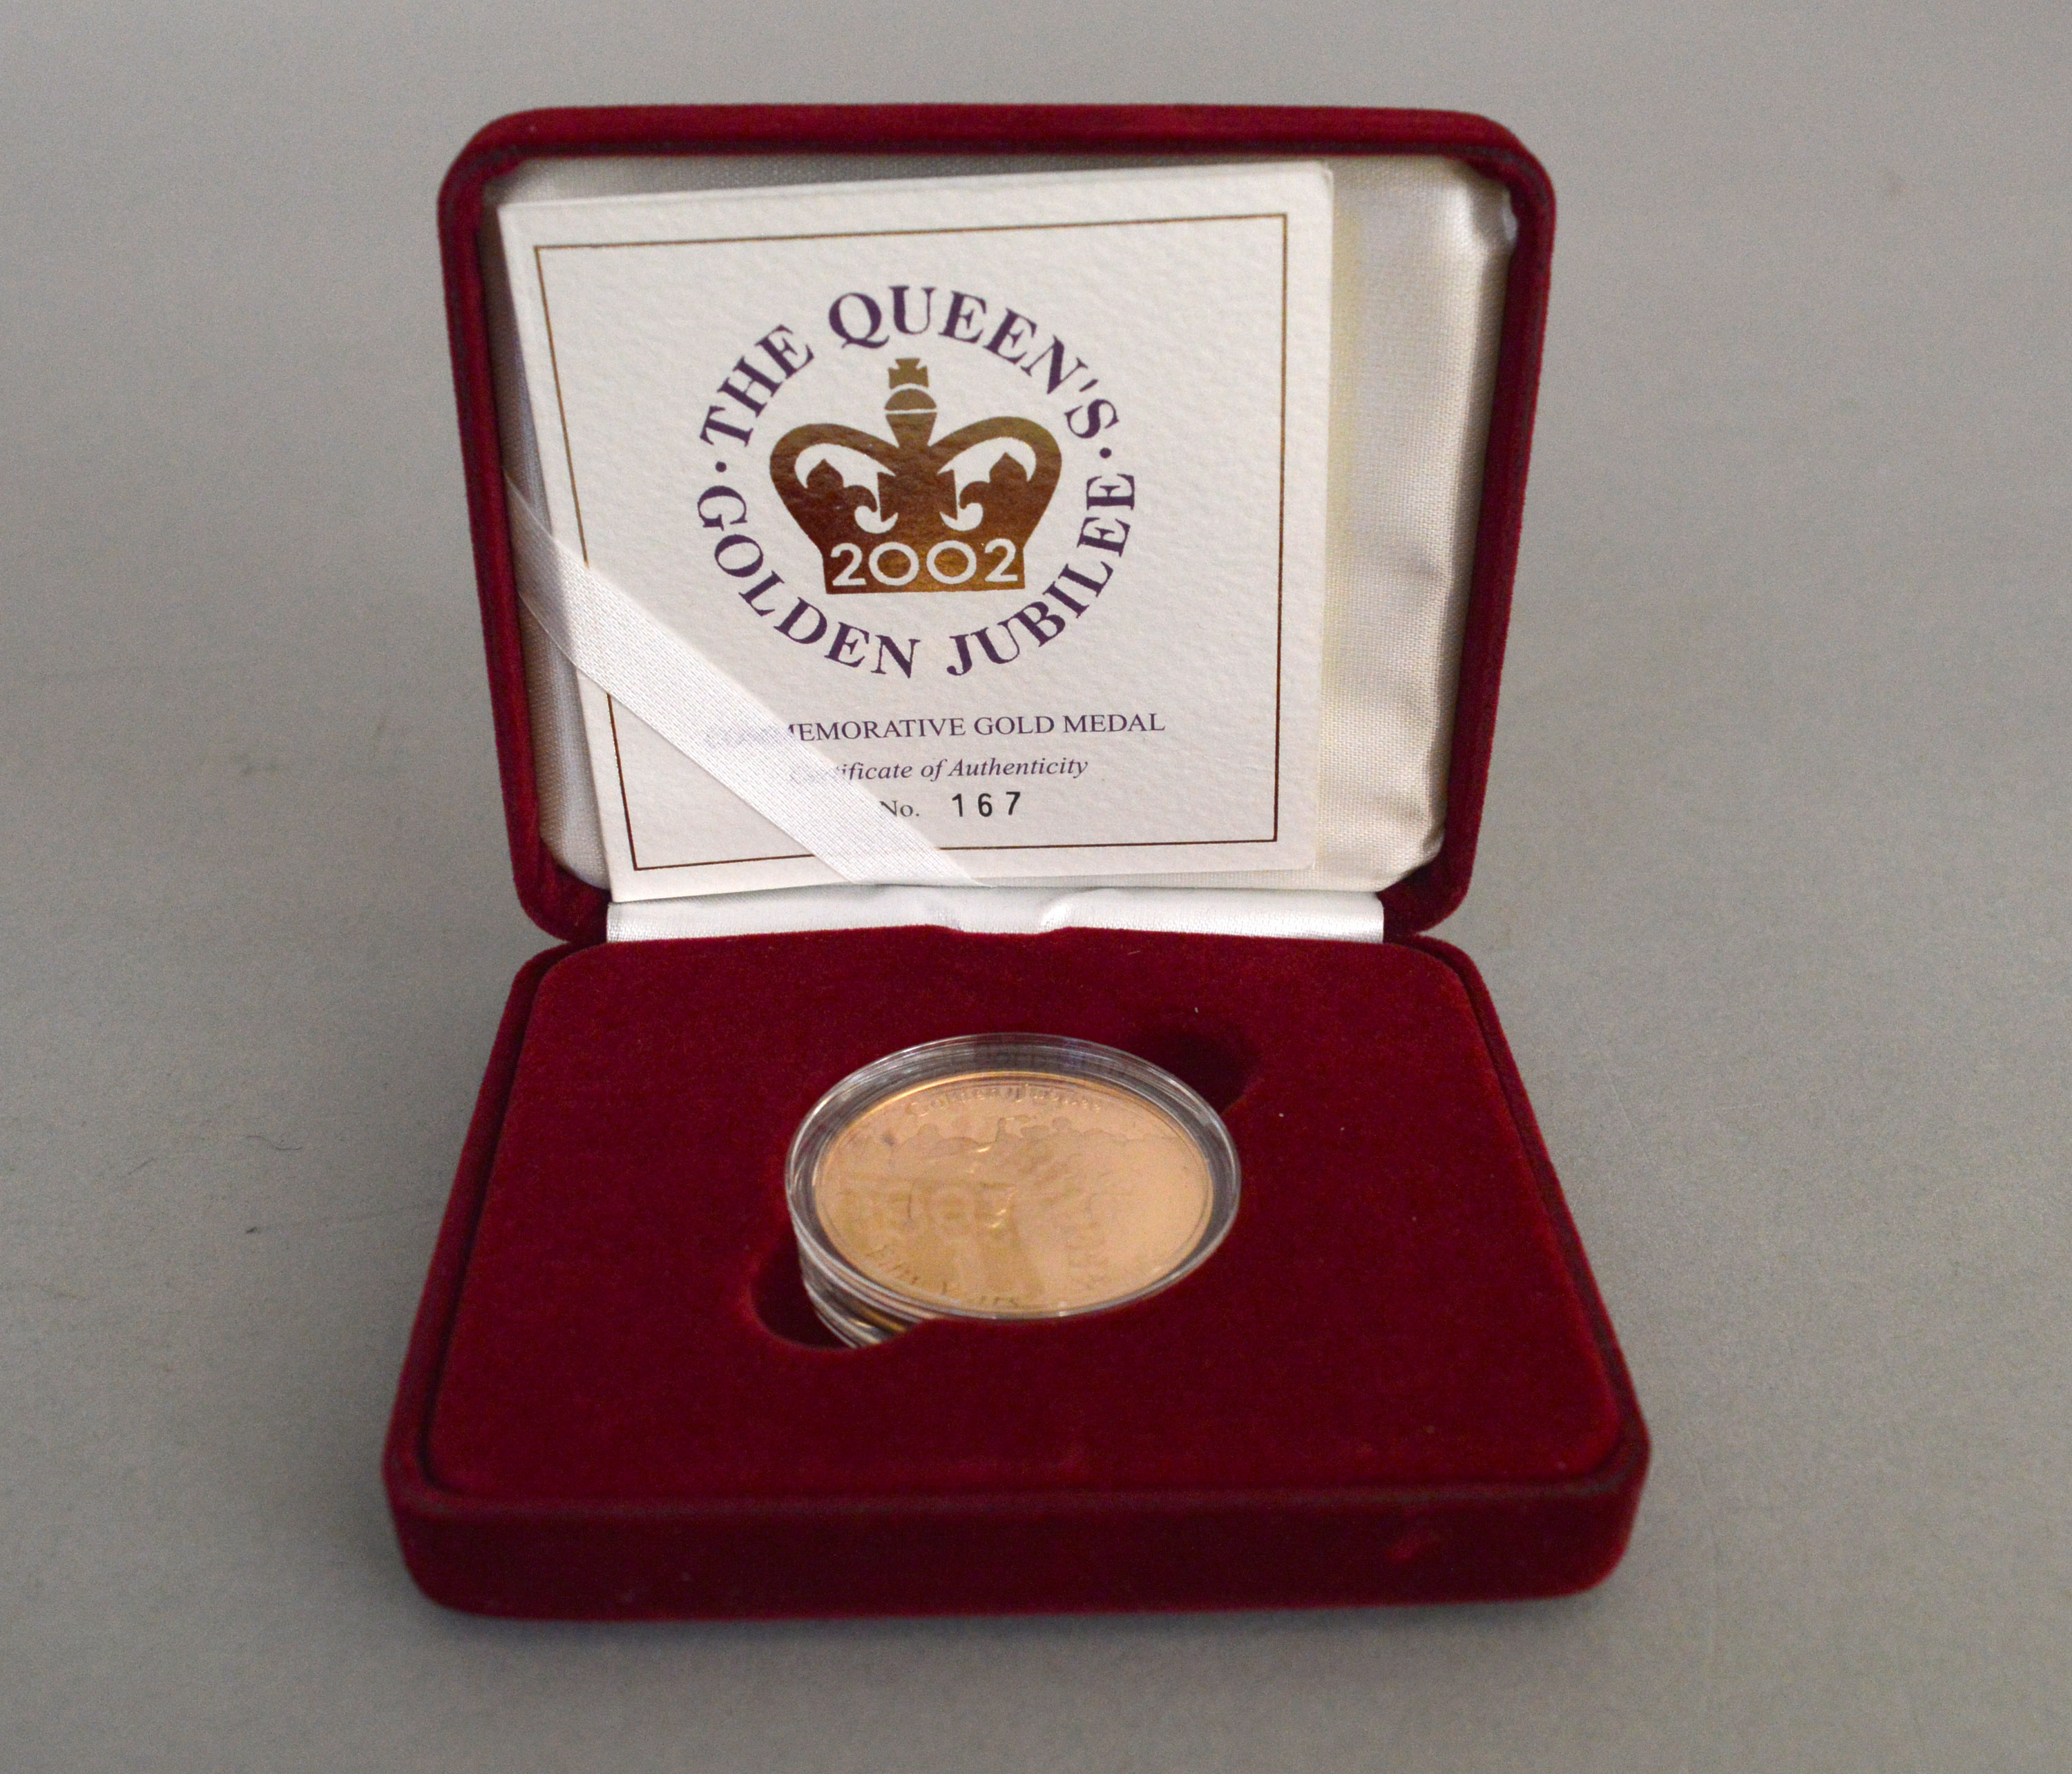 A Royal Mint 22ct gold medal commemorating The Queens Golden Jubilee, ltd edition 167 of 250,